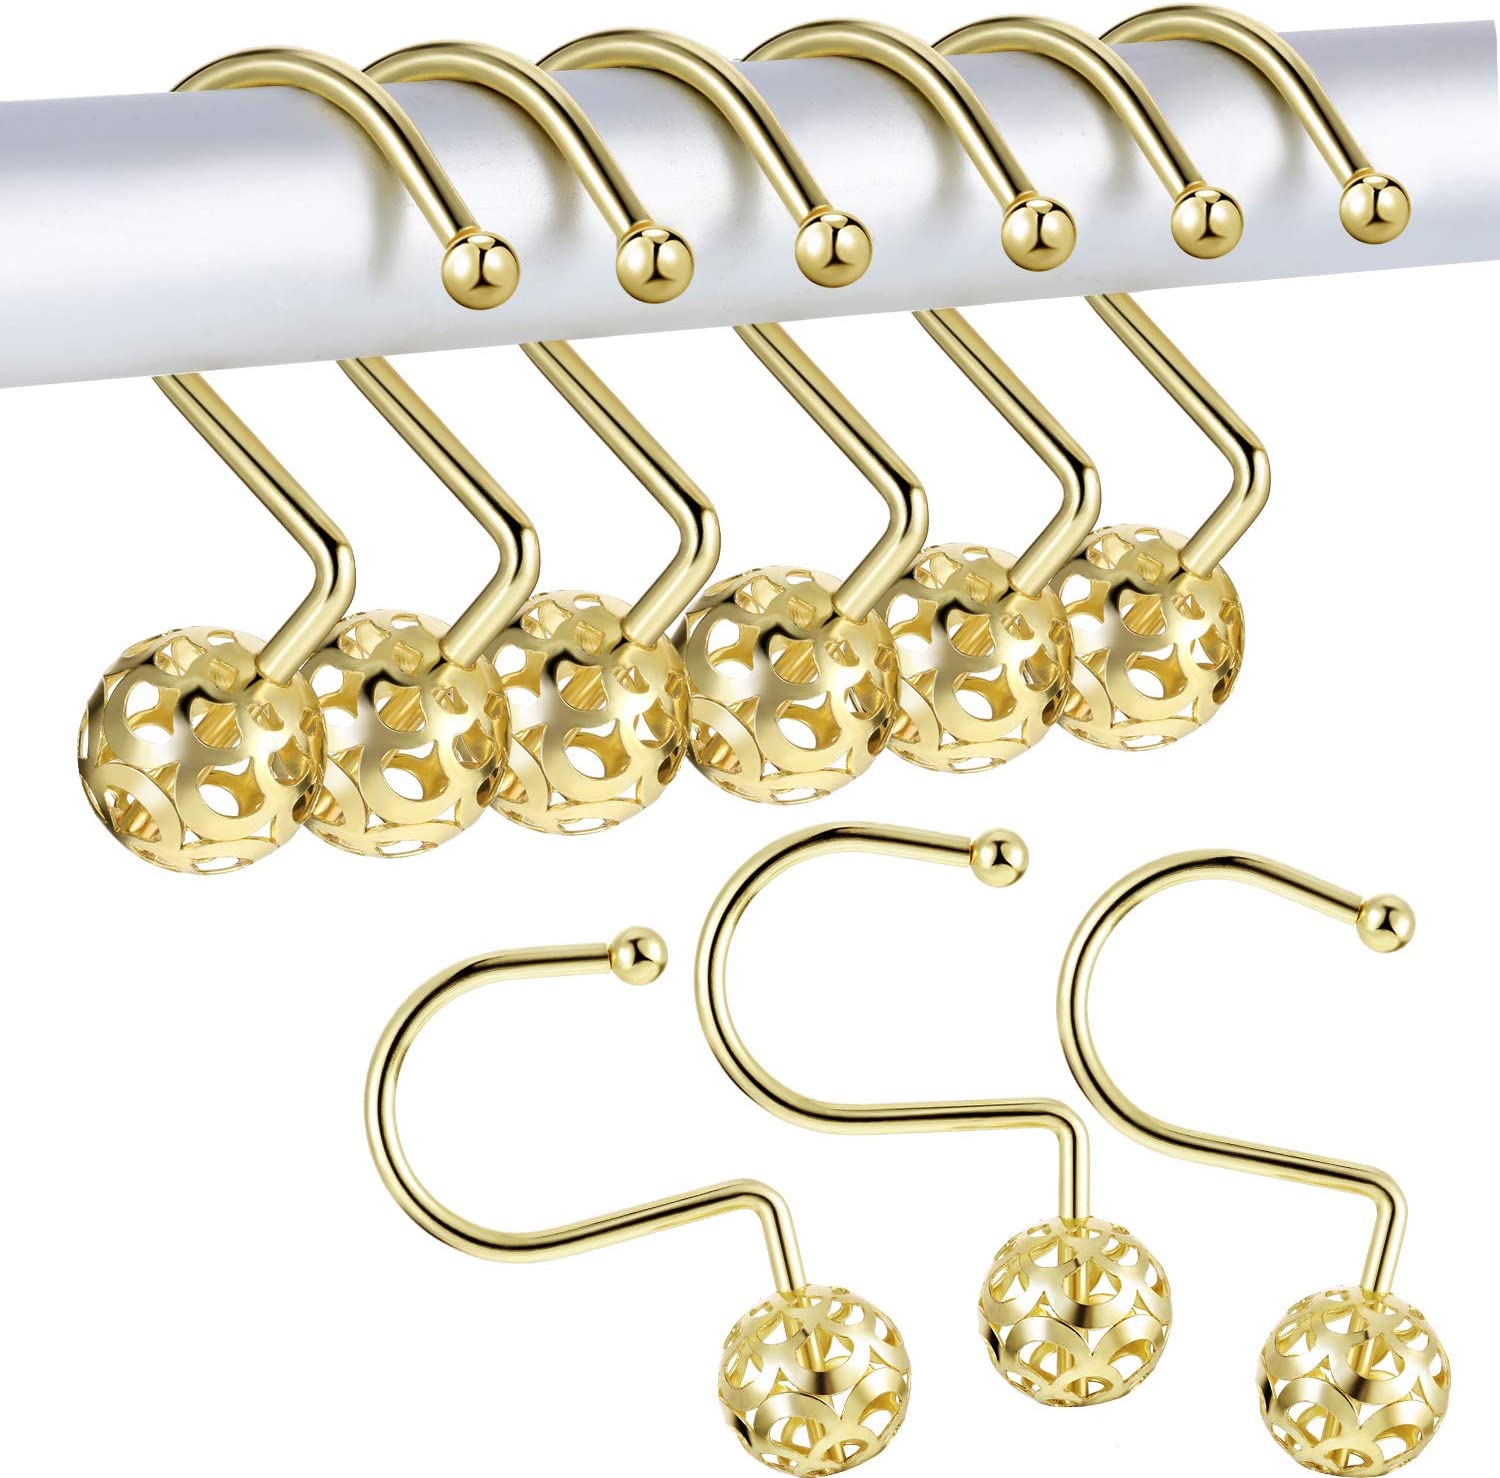 Curtain Hooks - Buy New Desgin Hooks For Curtain In Affordable Price